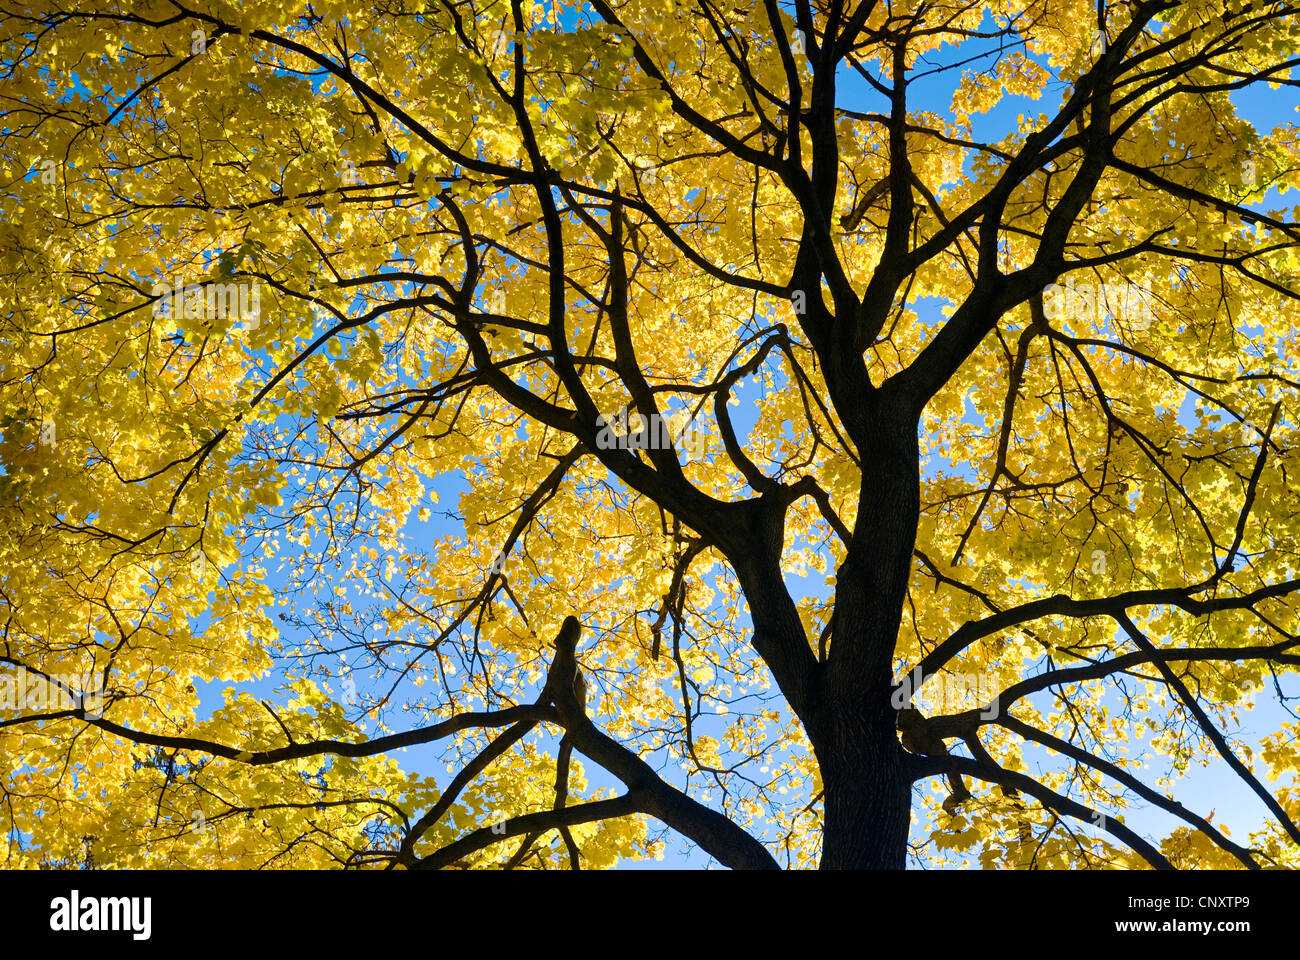 Looking up at tree leaves and autumn foliage in fall season. Stock Photo